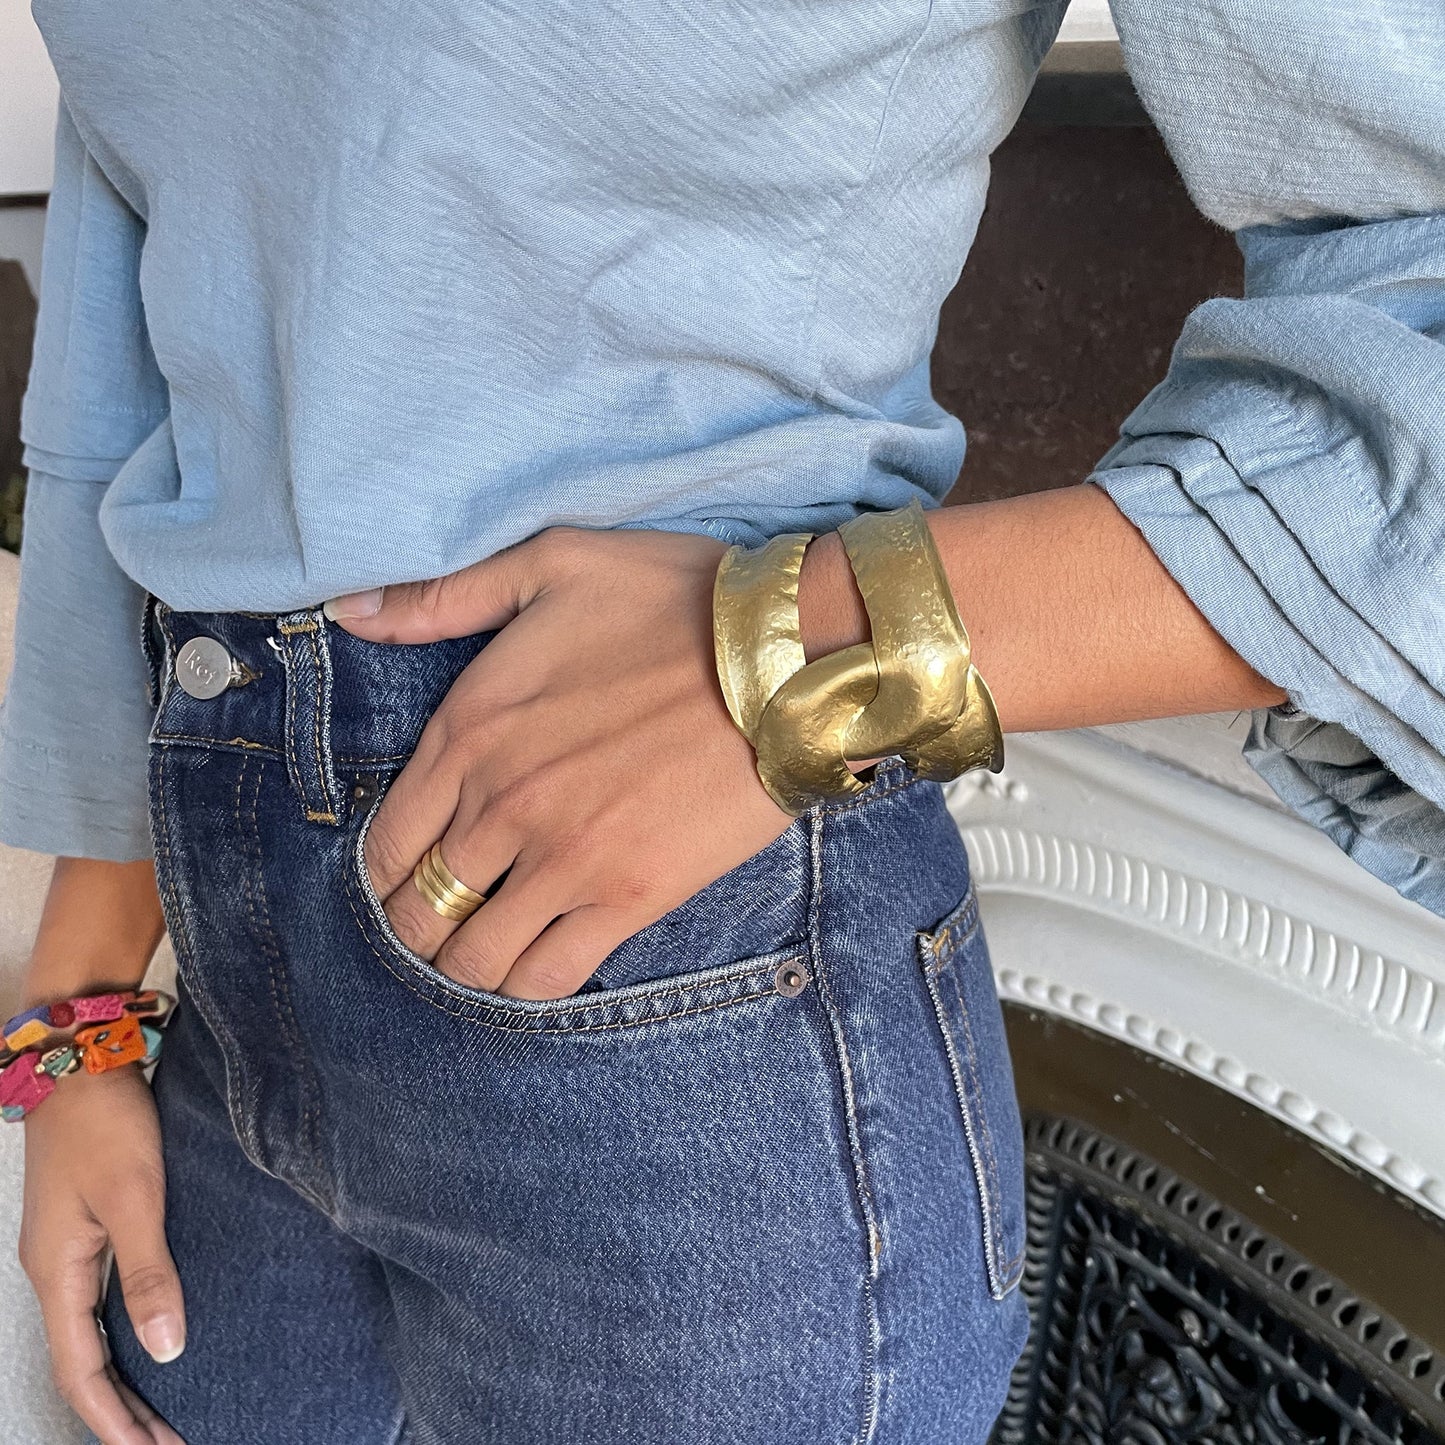 A woman's hand is slipped into her pocket and her wrist is adorned with a gold bracelet.